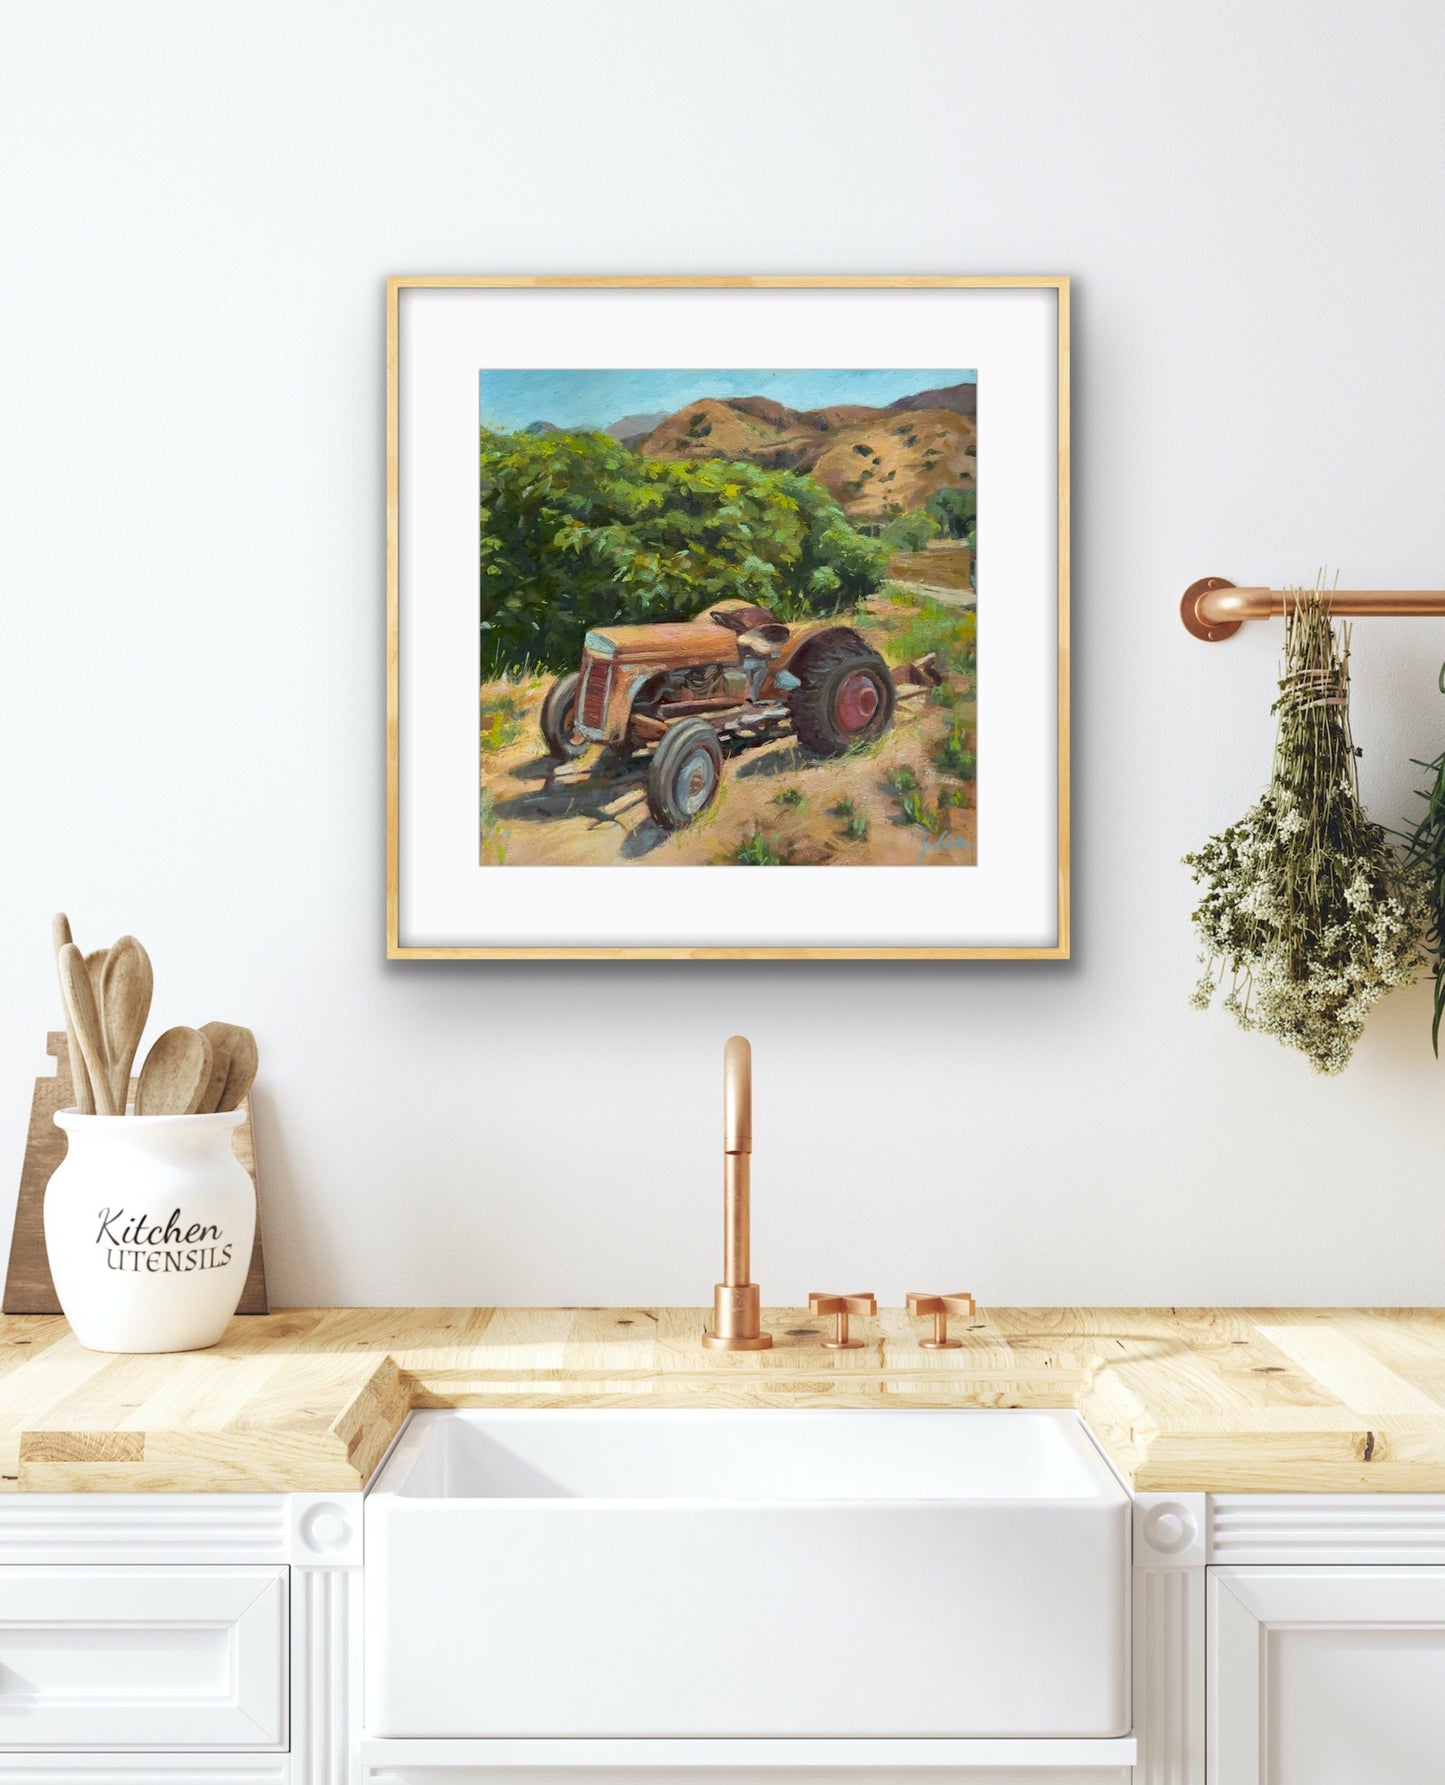 RETIRED ANTIQUE TRACTOR IN RUSTY GLORY  - Giclee Reproduction of Original Oil Painting Print